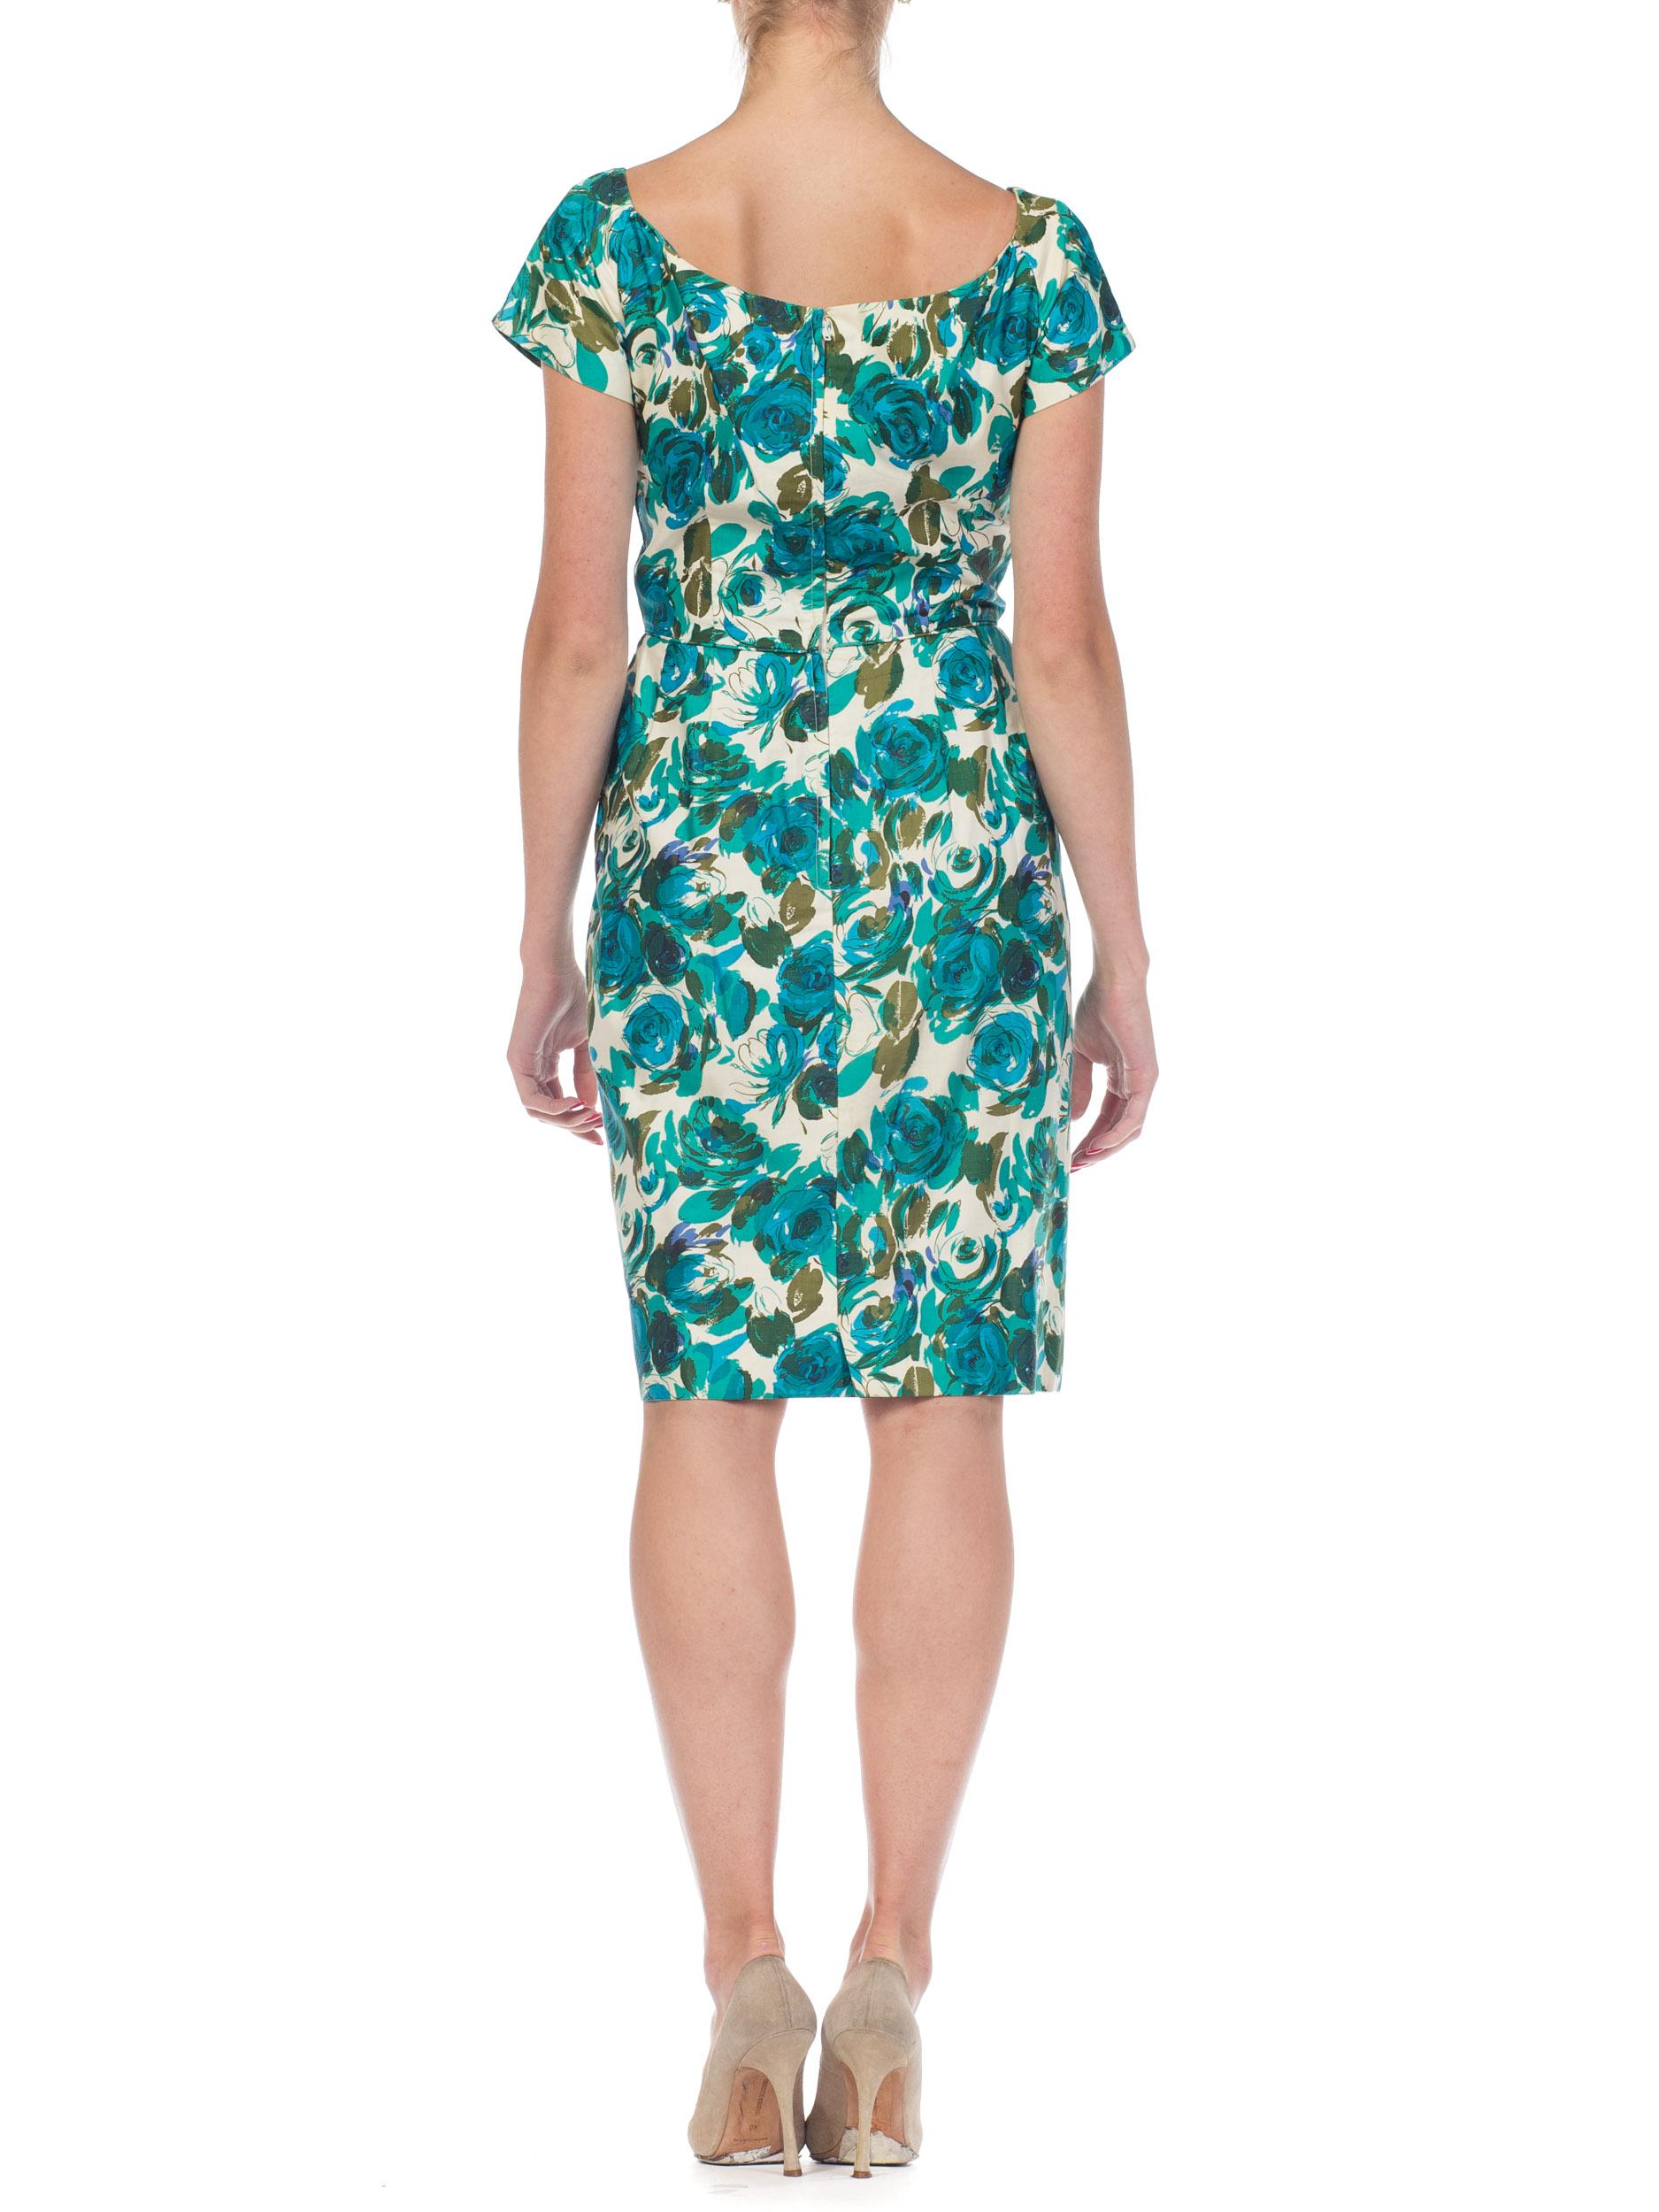 1950S Teal Floral Print Cotton Draped Bodice Dress With Cap Sleeves For Sale 7